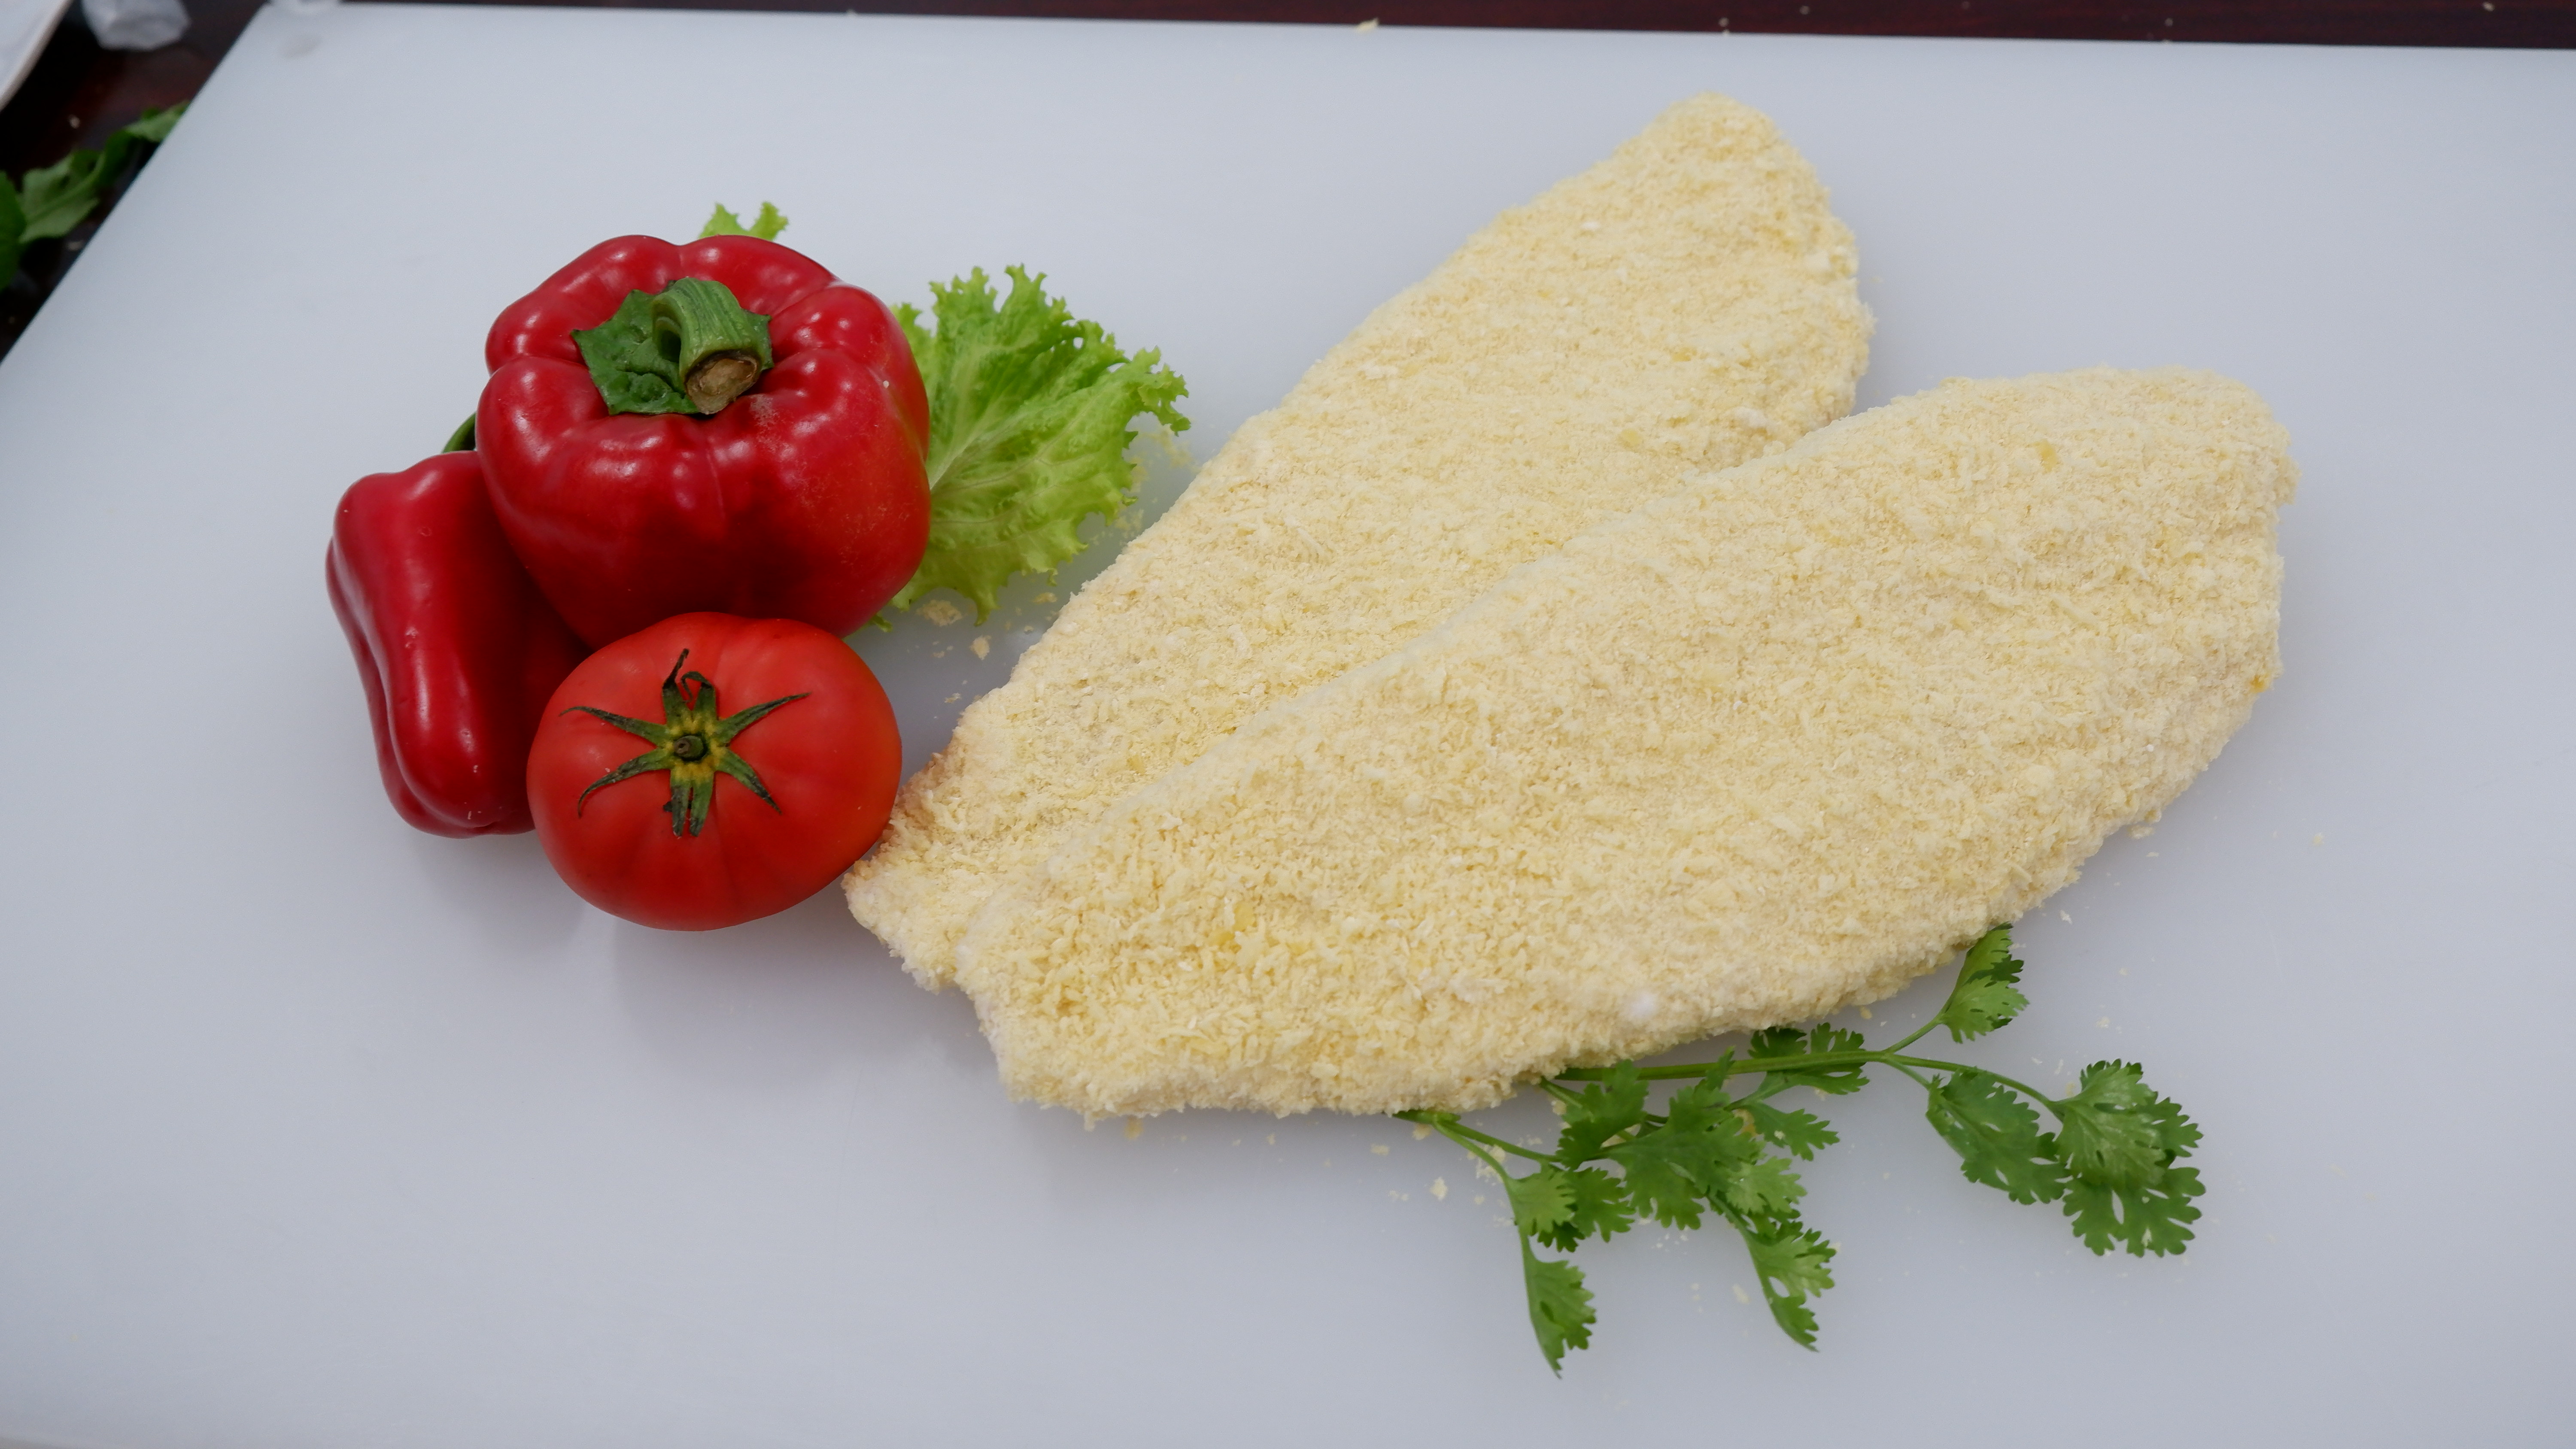 <span  class="uc_style_uc_tiles_grid_image_elementor_uc_items_attribute_title" style="color:#ffffff;">Breaded Pangasius Fillet</span>